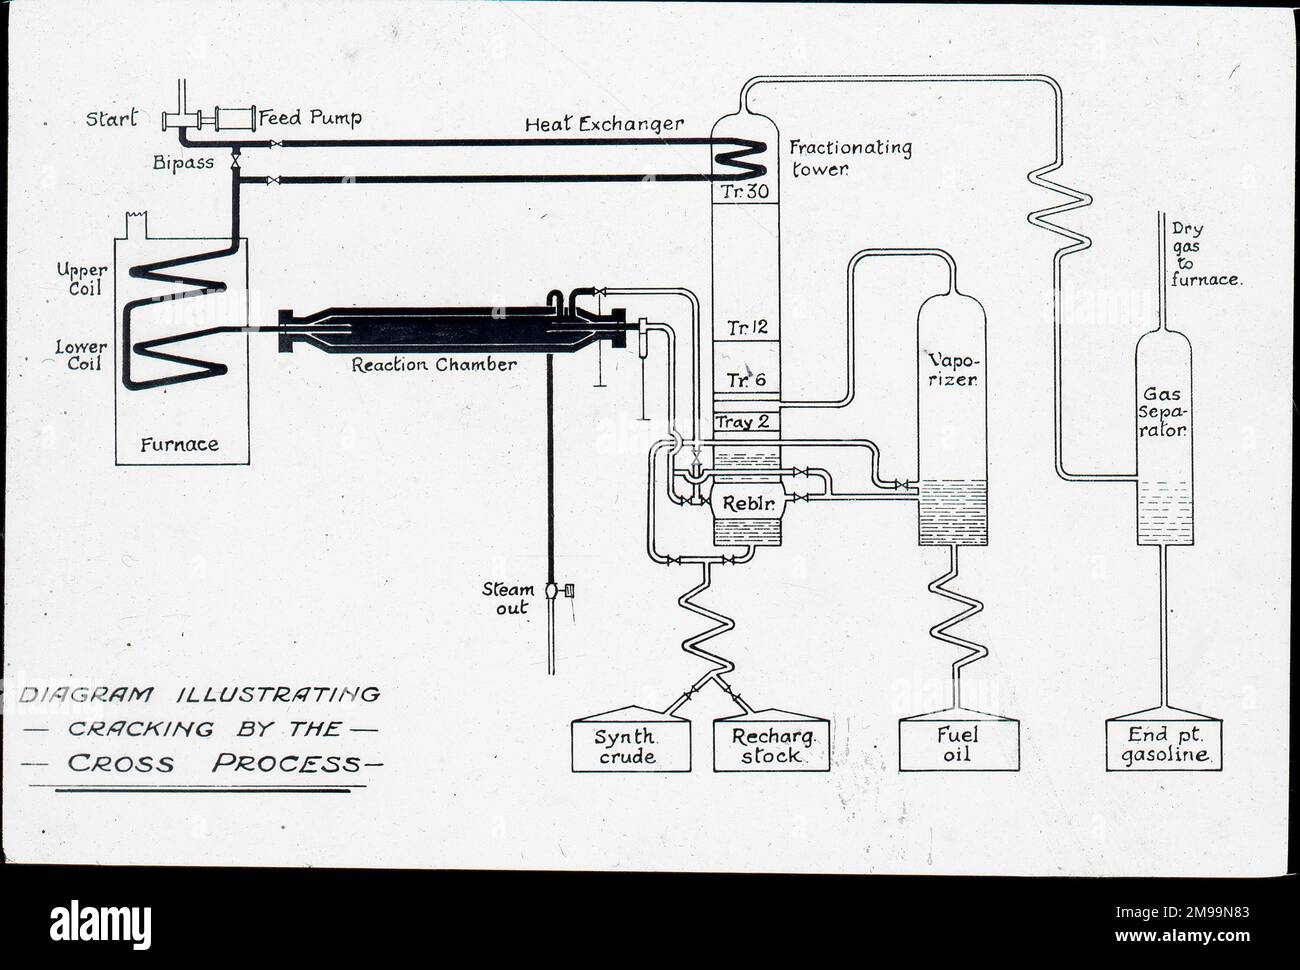 Diagram illustrating cracking by the cross process. William Francis Forbes-Sempill, 19th Lord Sempill AFC, AFRAeS (1893-1965) was a Scottish peer and record-breaking air pioneer who was later shown to have passed secret information to the Imperial Japanese military before the Second World War. In 1921, Sempill led an official military mission to Japan that showcased the latest British aircraft. In subsequent years he continued to aid the Imperial Japanese Navy in developing its Navy Air Service and began giving military secrets to the Japanese. Although his activities were uncovered by Briti Stock Photo